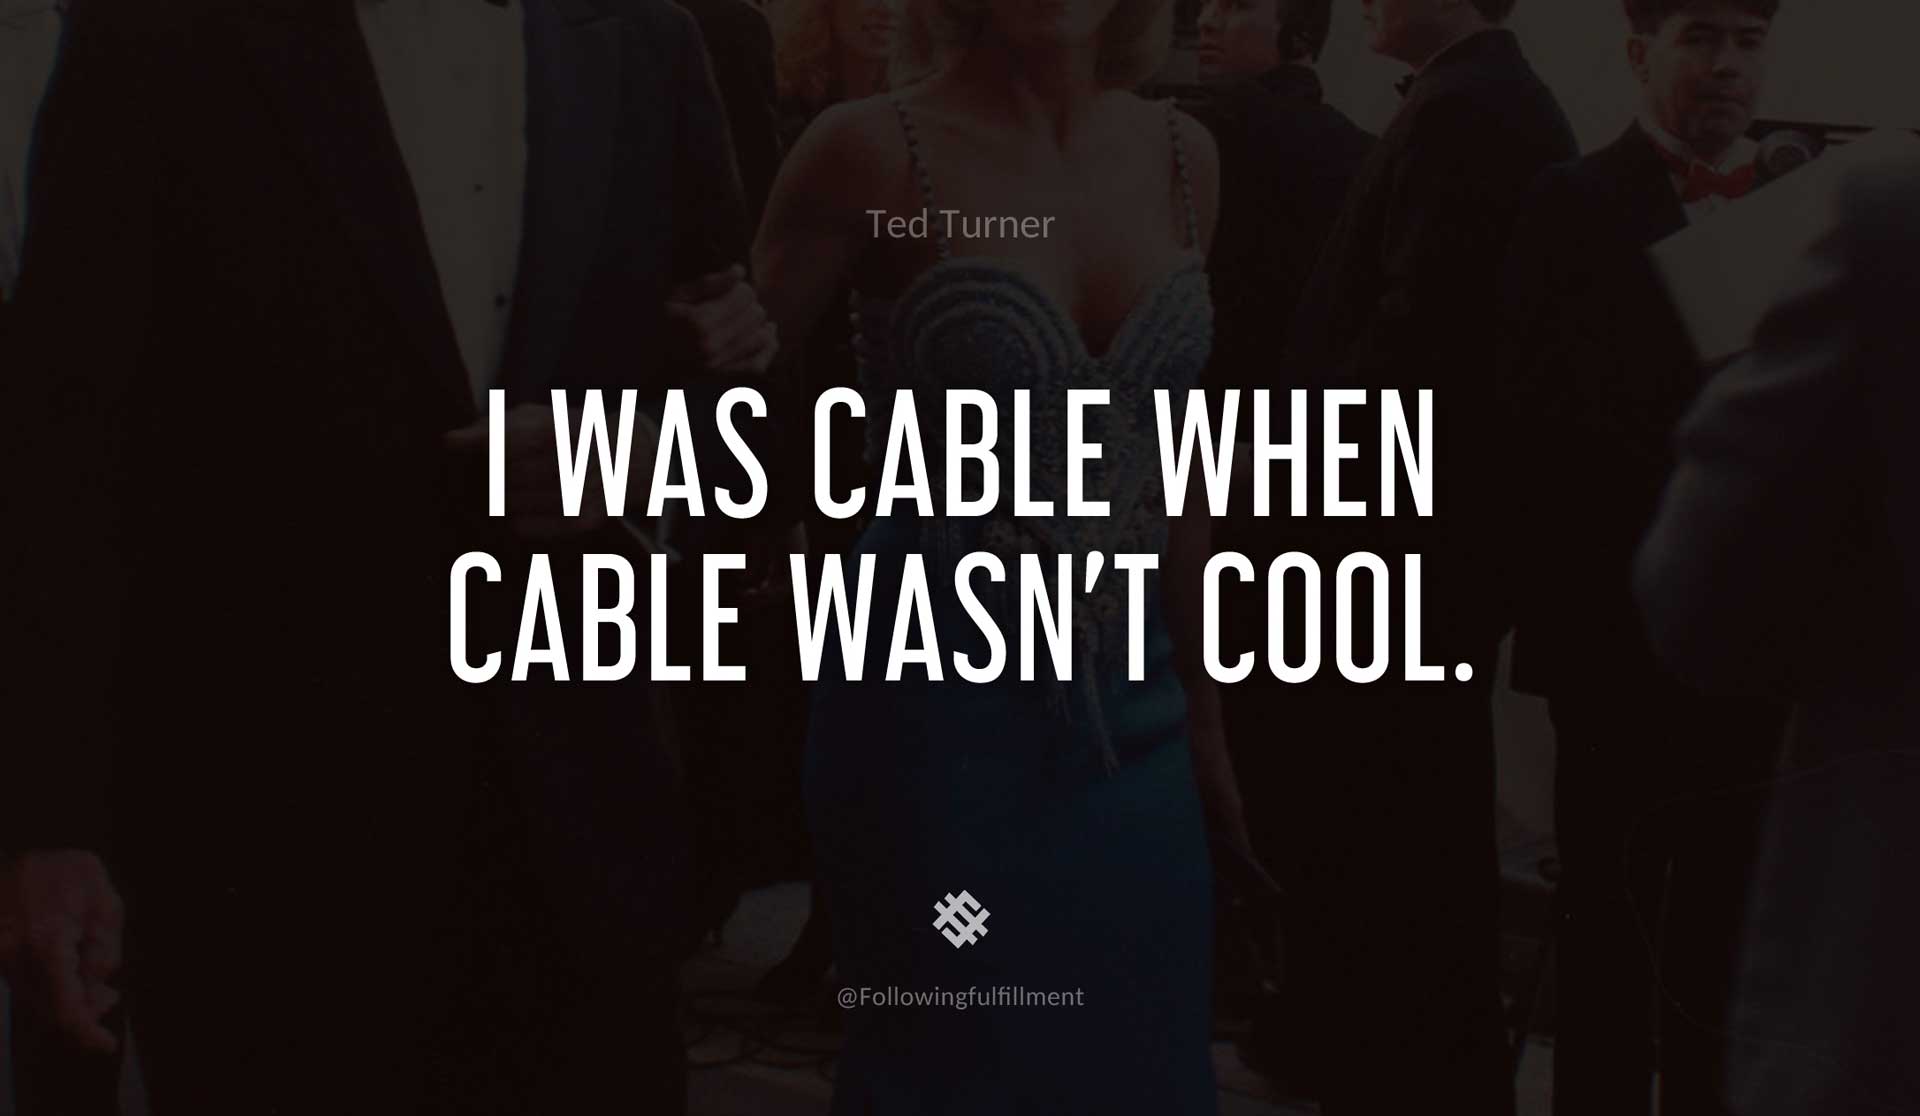 I-was-cable-when-cable-wasn't-cool.-TED-TURNER-Quote.jpg